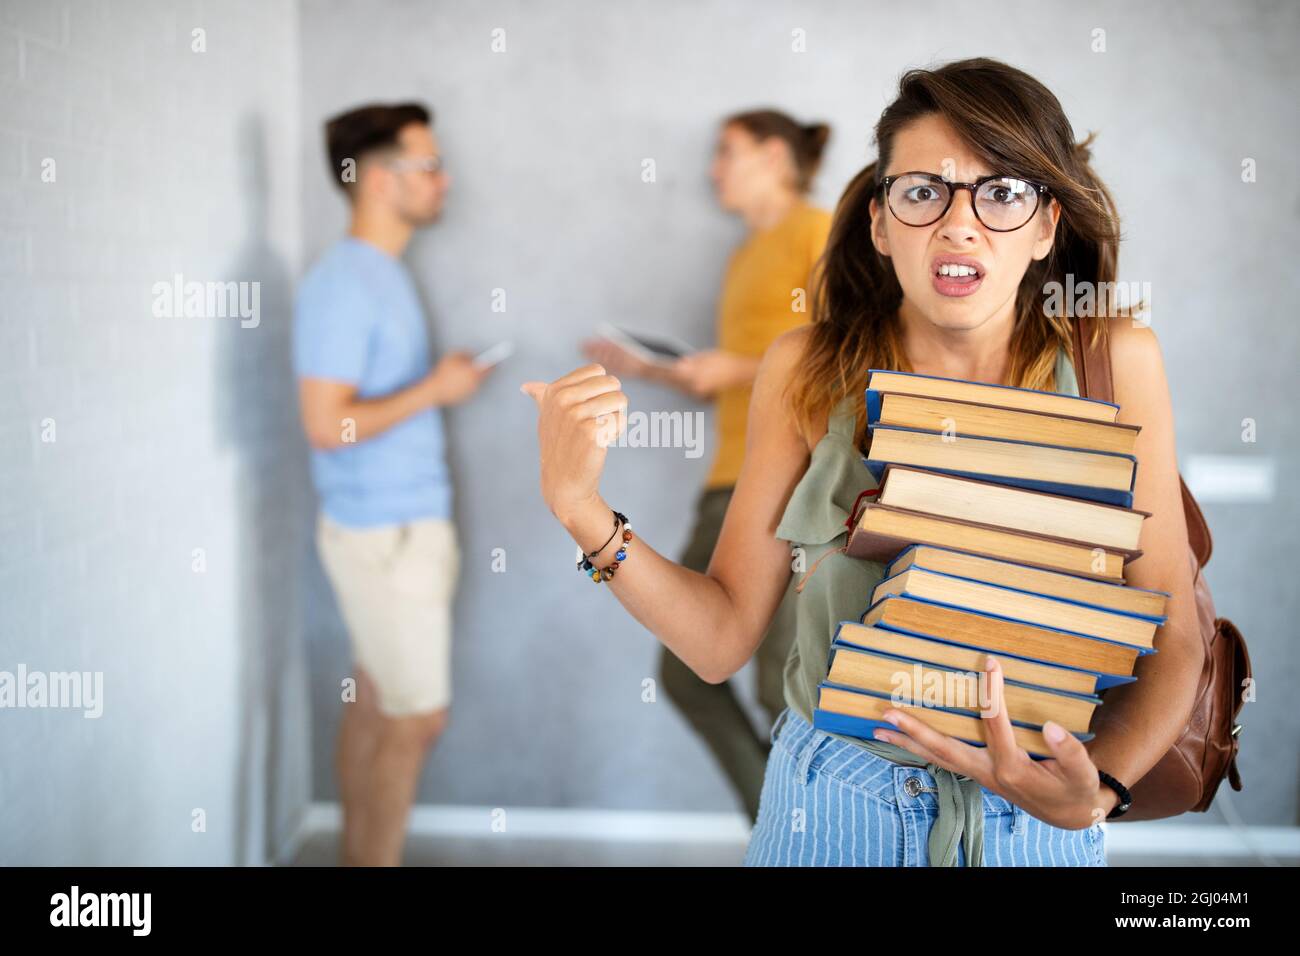 Unhappy student girl looking at her lazy mates who are playing with the phone instead of working Stock Photo